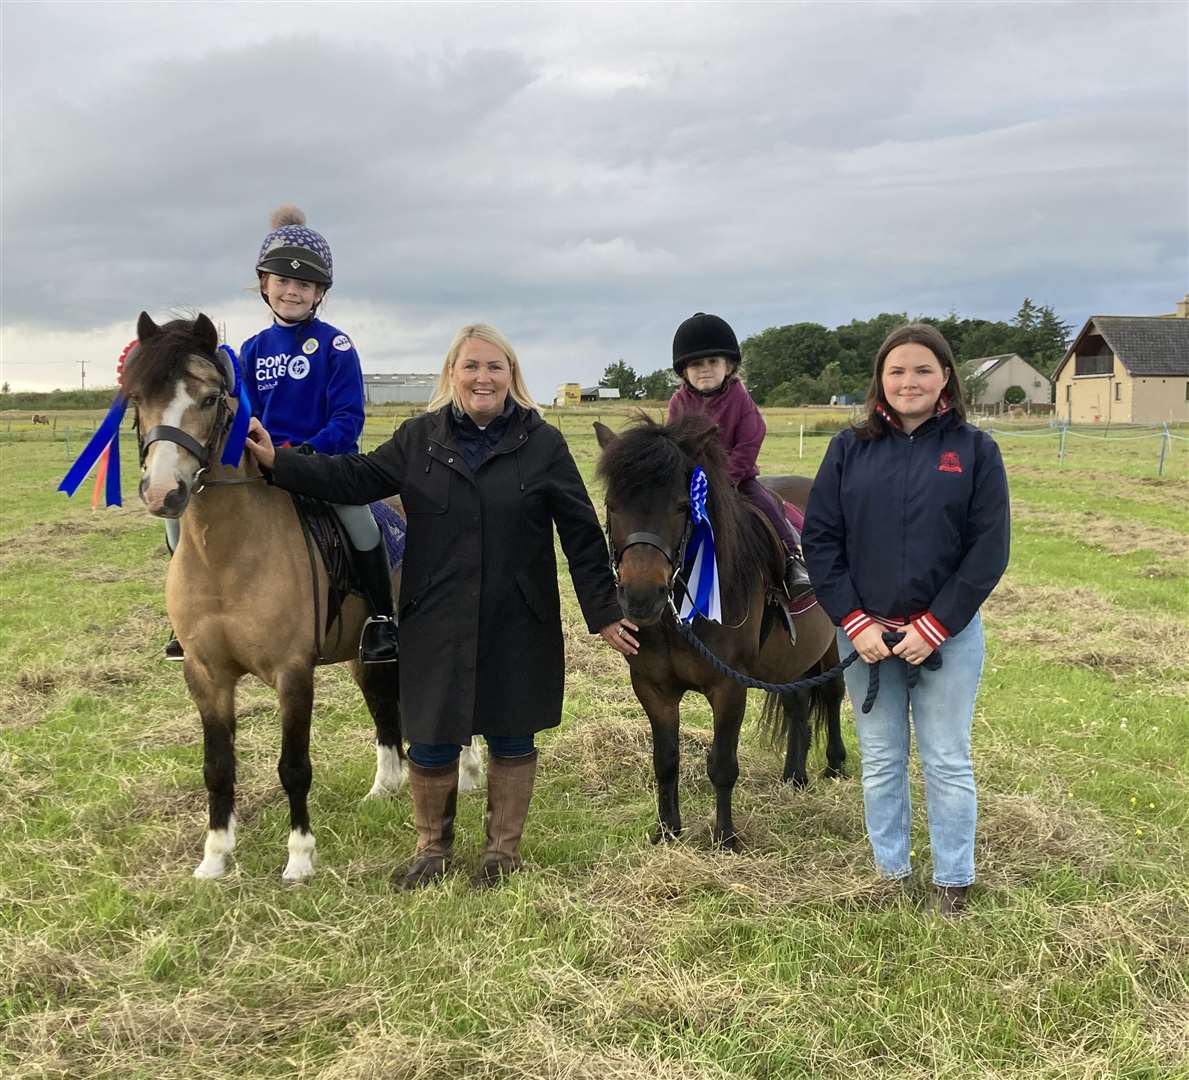 Handy pony competition winner Rachel MacGregor on Dandy, with judges Judith and Molly Miller from Bilbster and reserve champion Tabitha Patterson on Red.